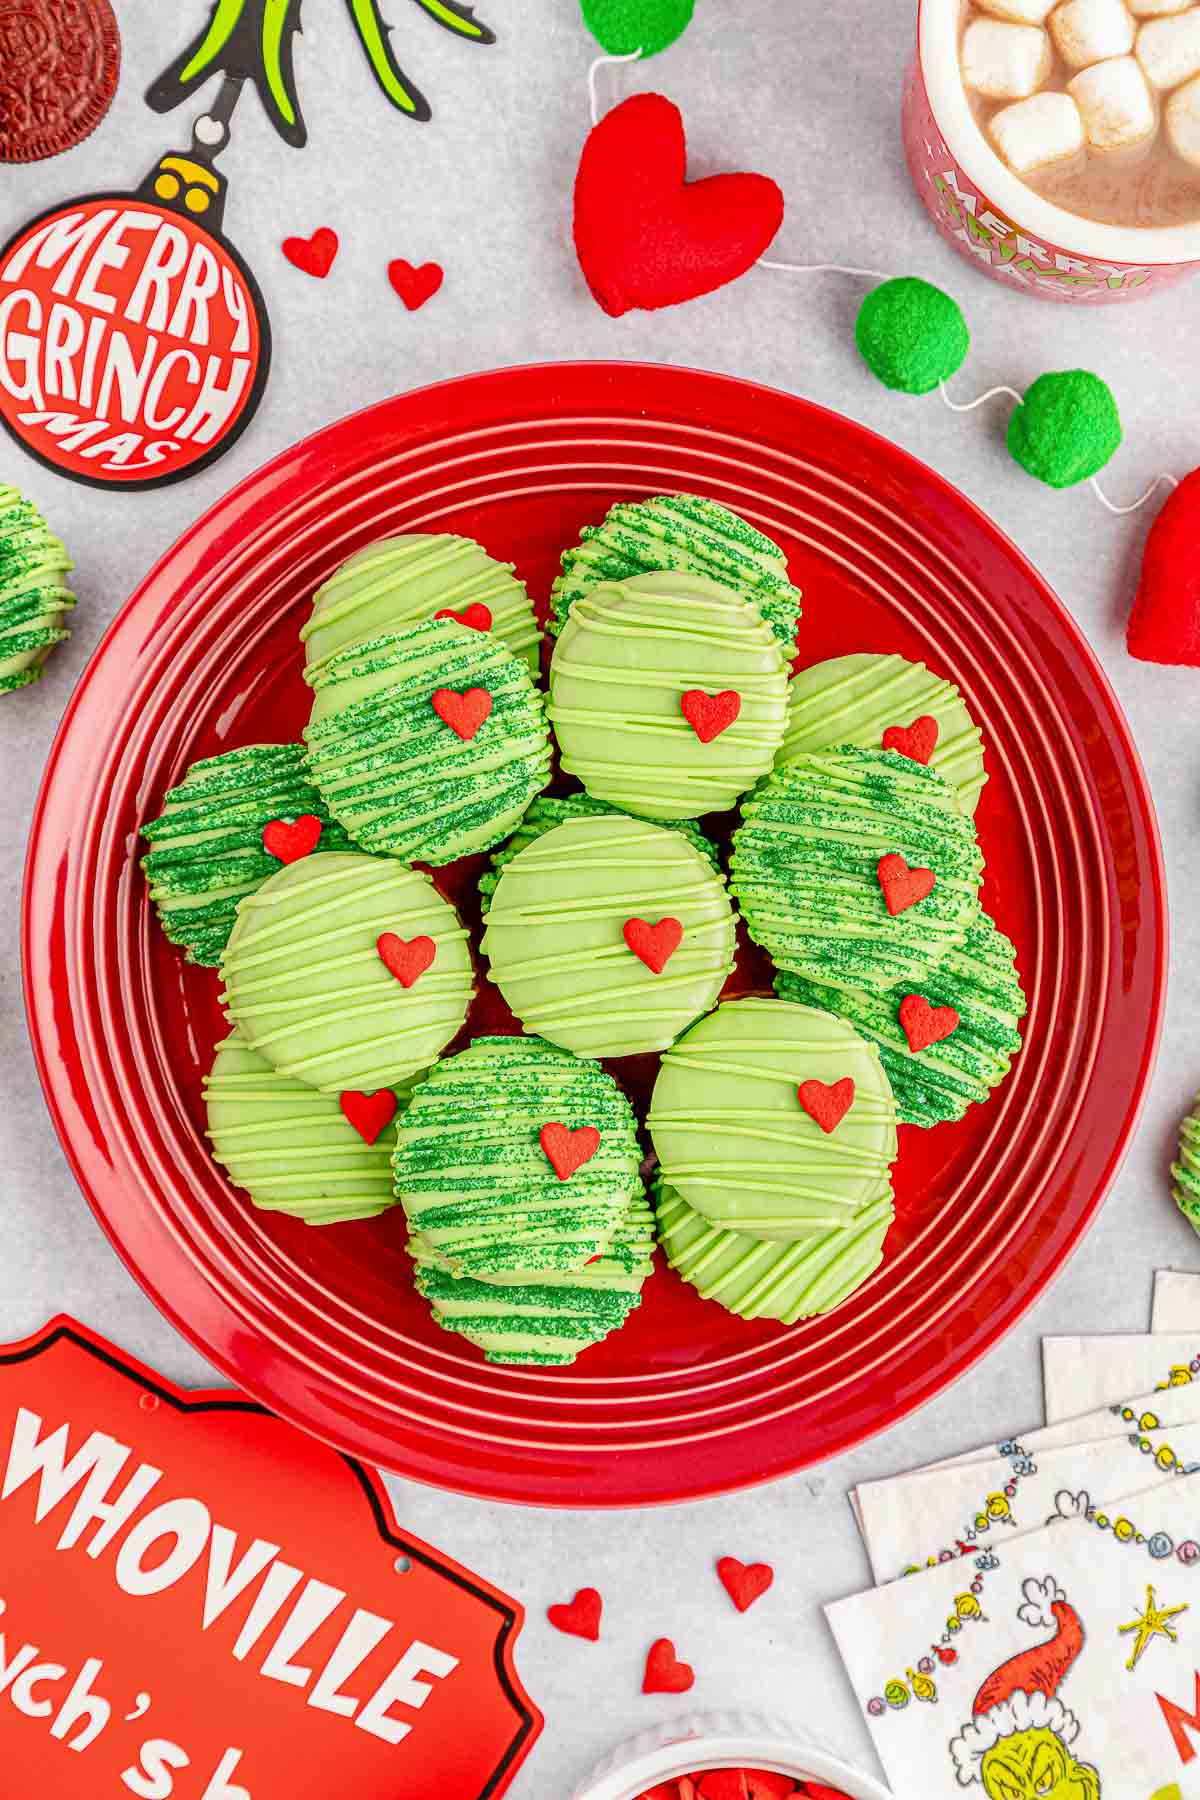 A red plate of several grinch oreos with a heart shaped candy on it.